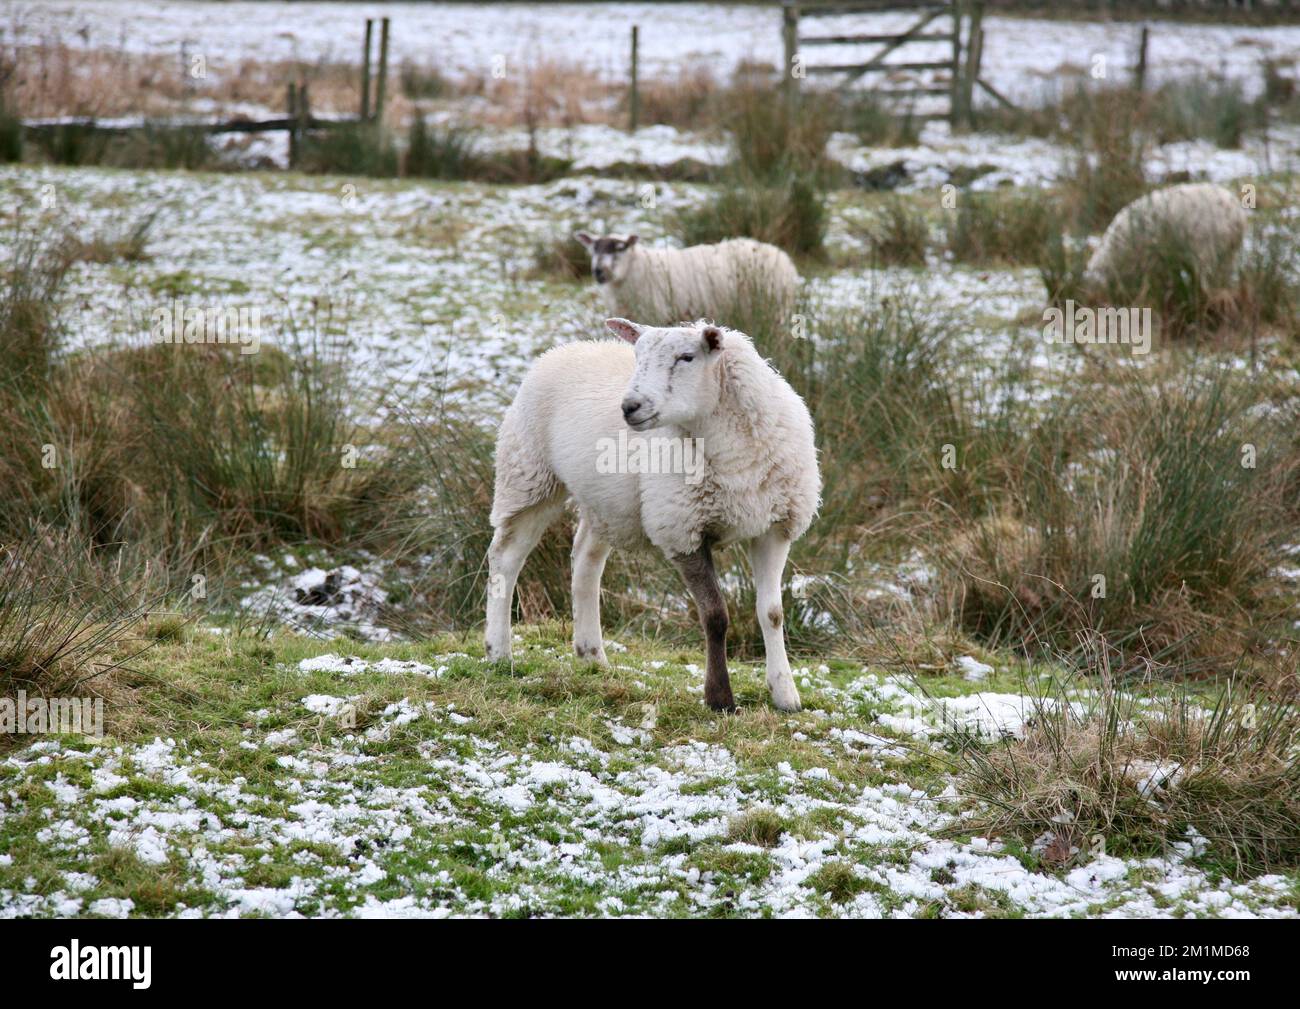 A handsome looking sheep on Pendle Hill, Lancashire, U.K. Stock Photo